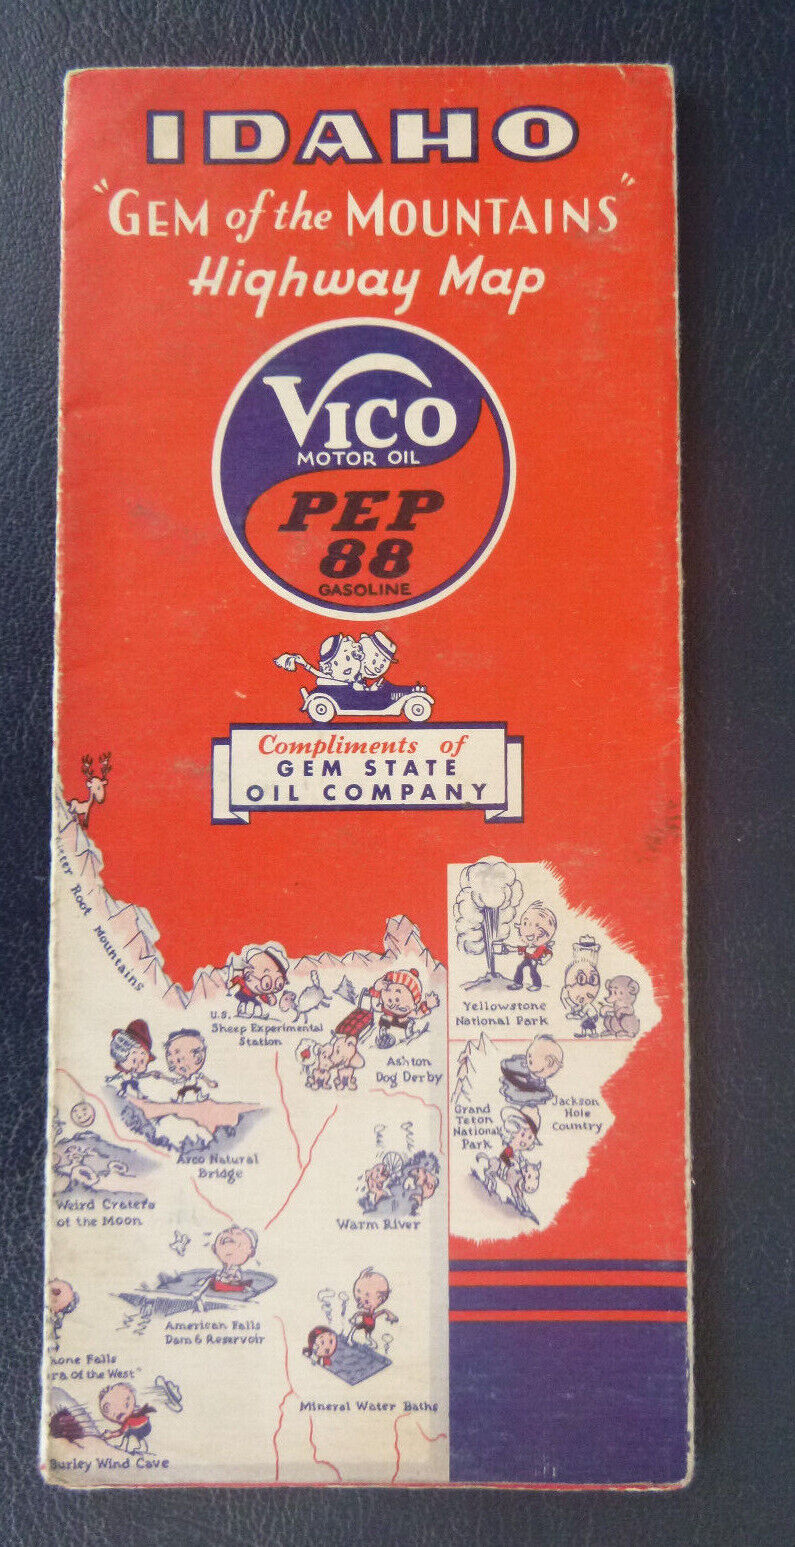 1934 Idaho road map Gem State Oil gas Vico Pep 88 Gem of the Mountains